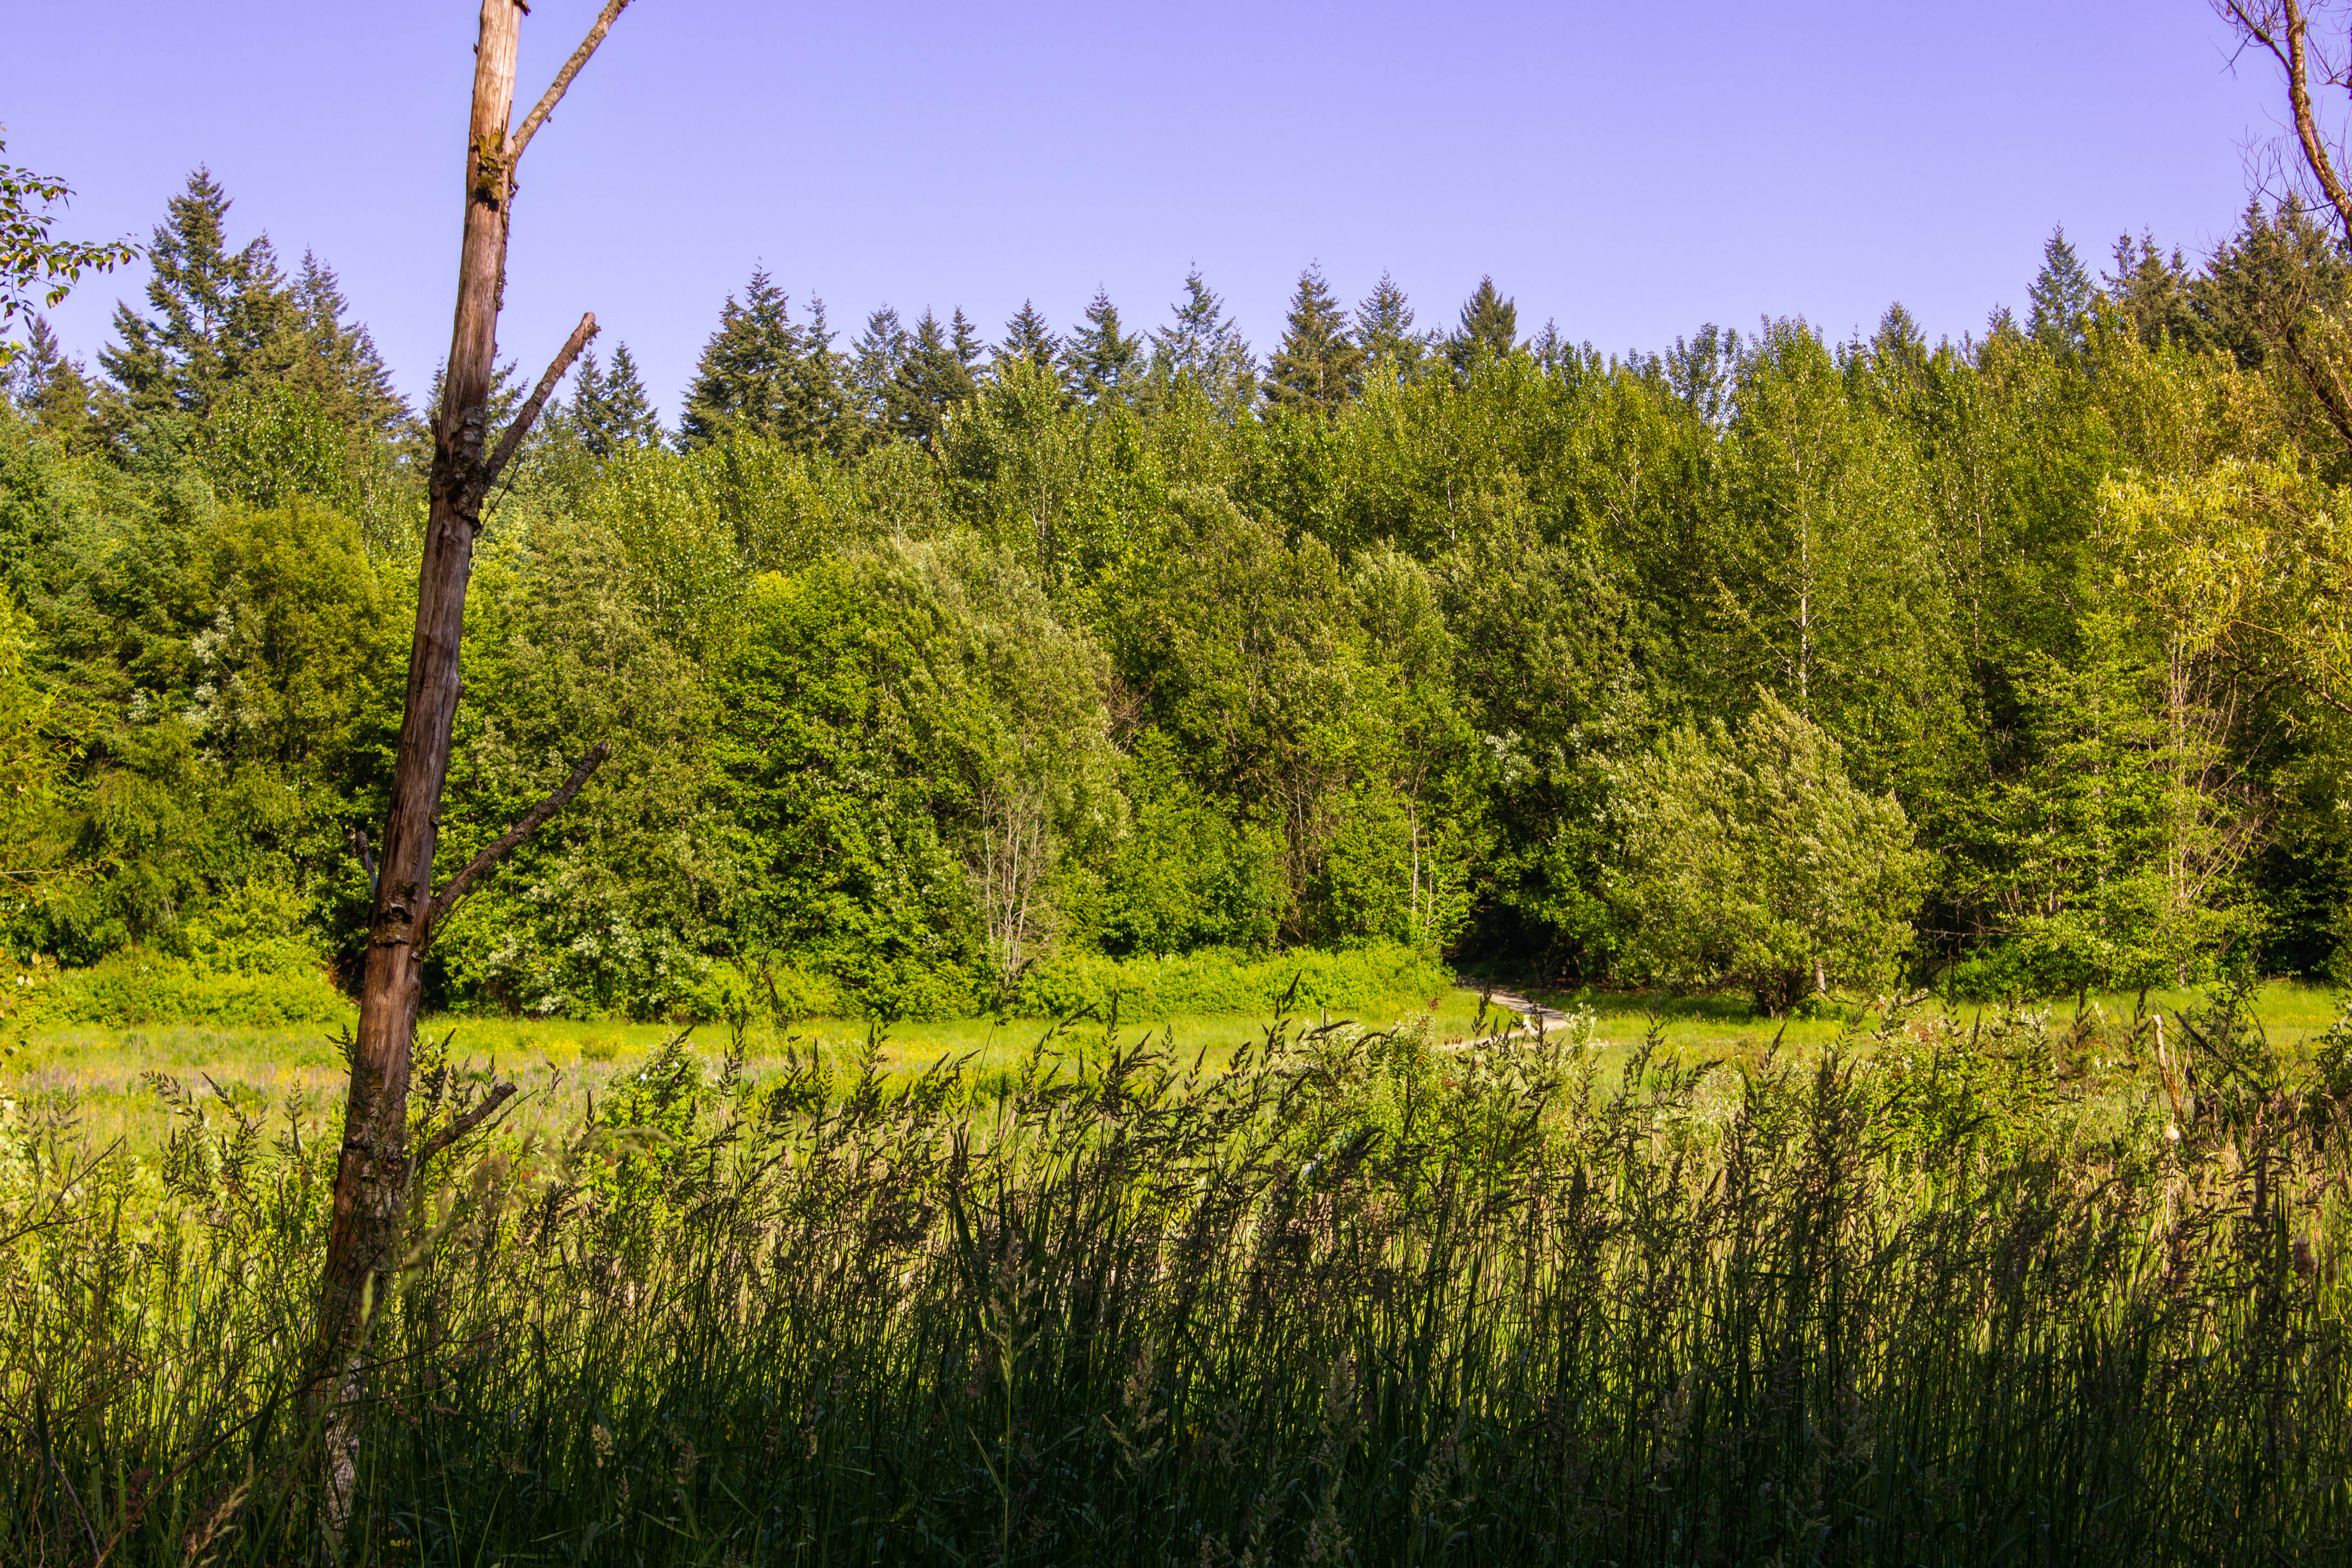 A picture of the field between the Willow Trail and Skyline Trail in the Green Timbers Urban Forrest in Surrey.